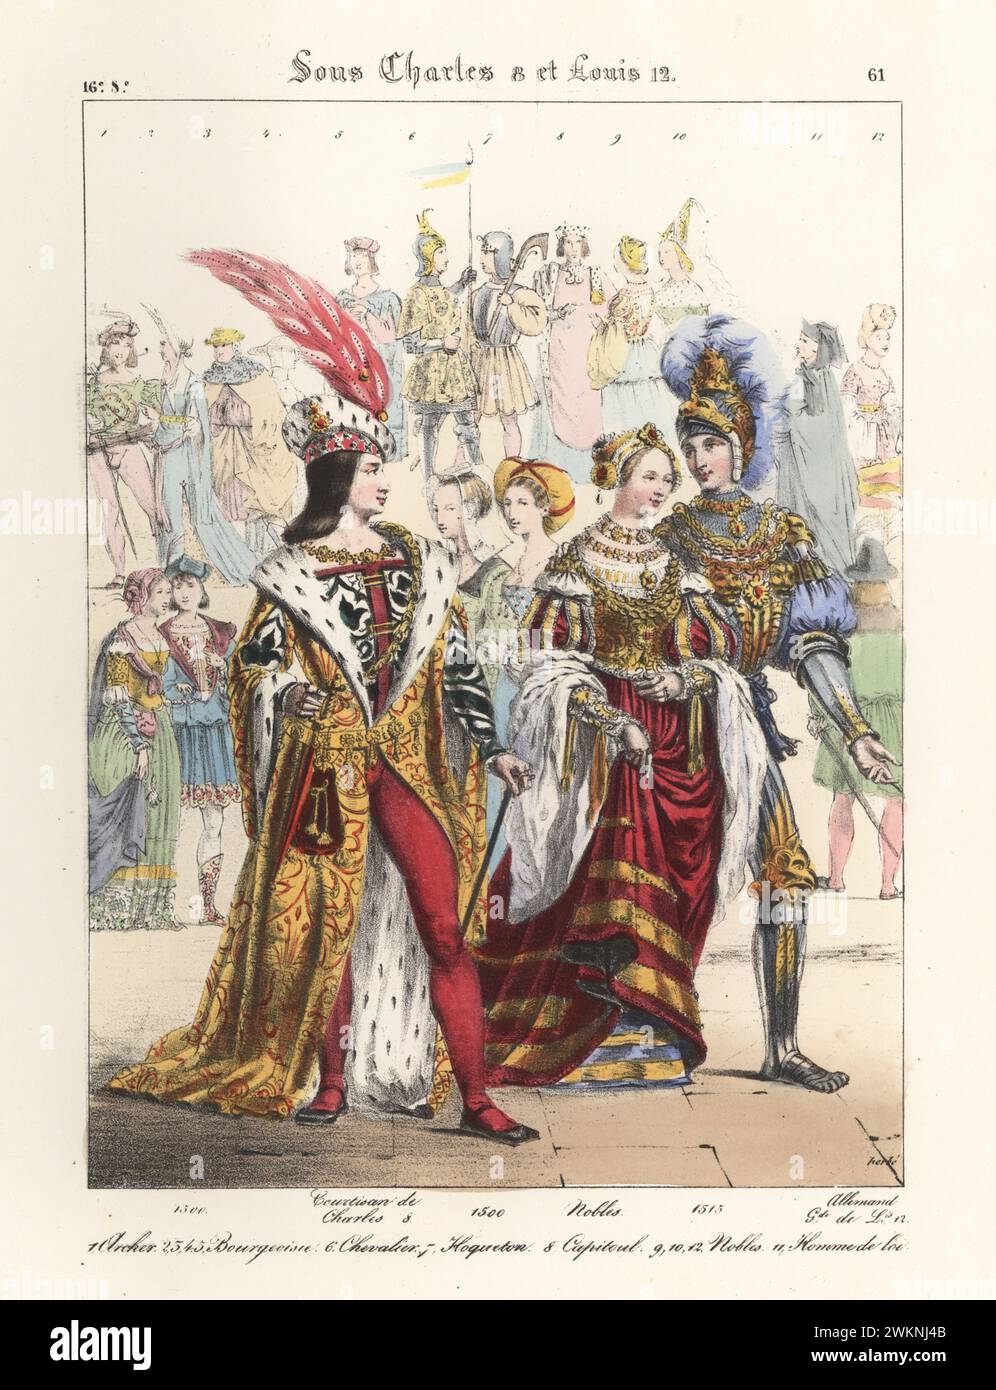 Courtier of King Charles VIII of France, with other nobles, 16th century. Nobleman in plumed fur cap, ermine-lined houppelande, embroidered doublet and hose. German guard in background. Courtisan de Charles VIII, Nobles, Allemand Garde de Louis XII. Sous Charles 8 et Louis 12. Handcoloured lithograph by Godard after an illustration by Charles Auguste Herbé from his own Costumes Francais, Civils, Militaires et Religieux, French Costumes, Civil, Military and Religious, Maison Martinet, Paris, 1837. Stock Photo